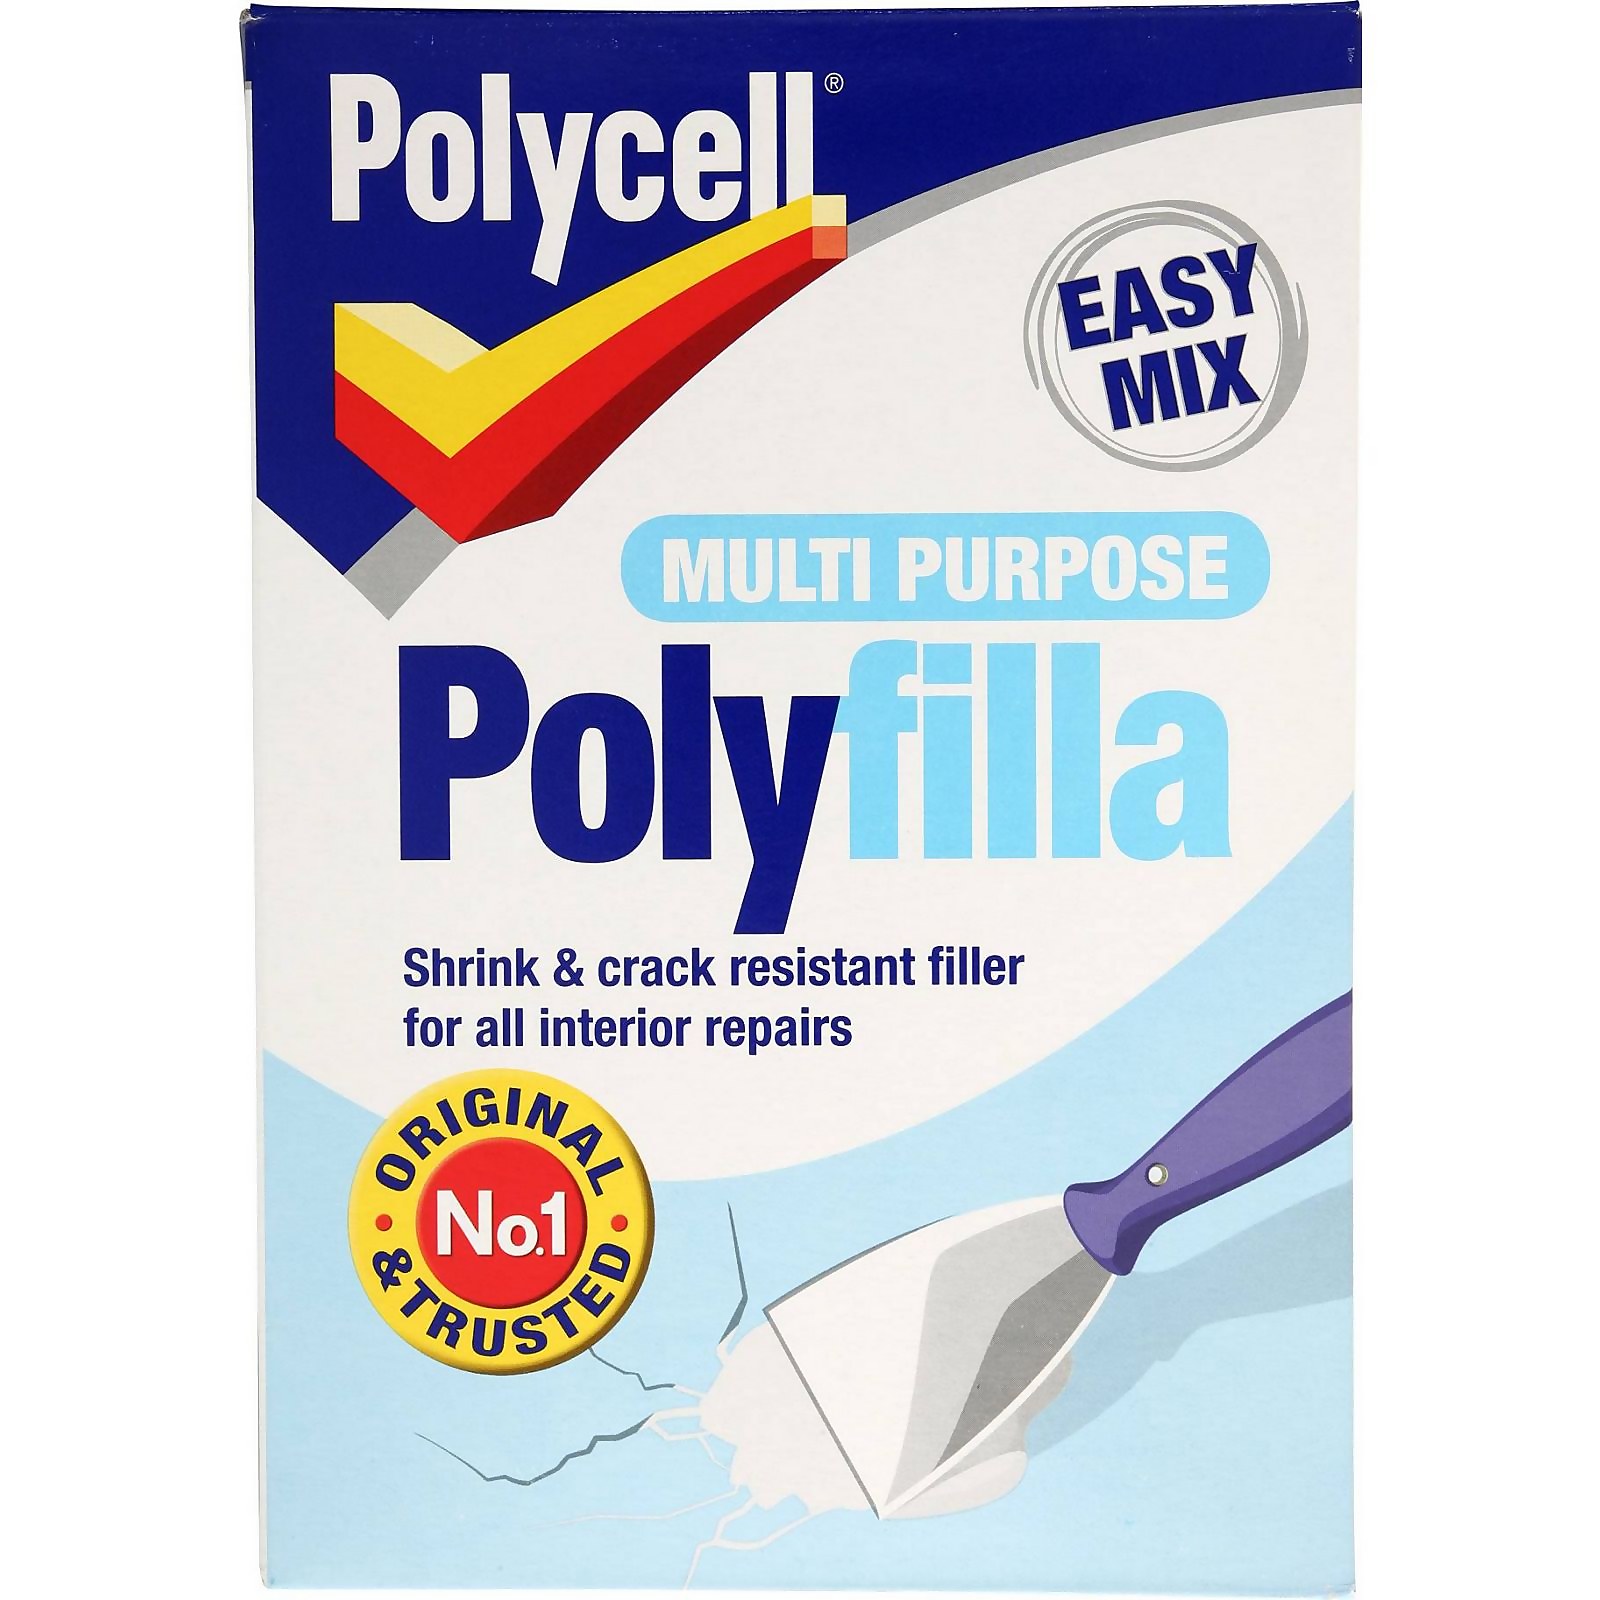 Photo of Polycell Multipurpose Interior Polyfilla - 1.8kg